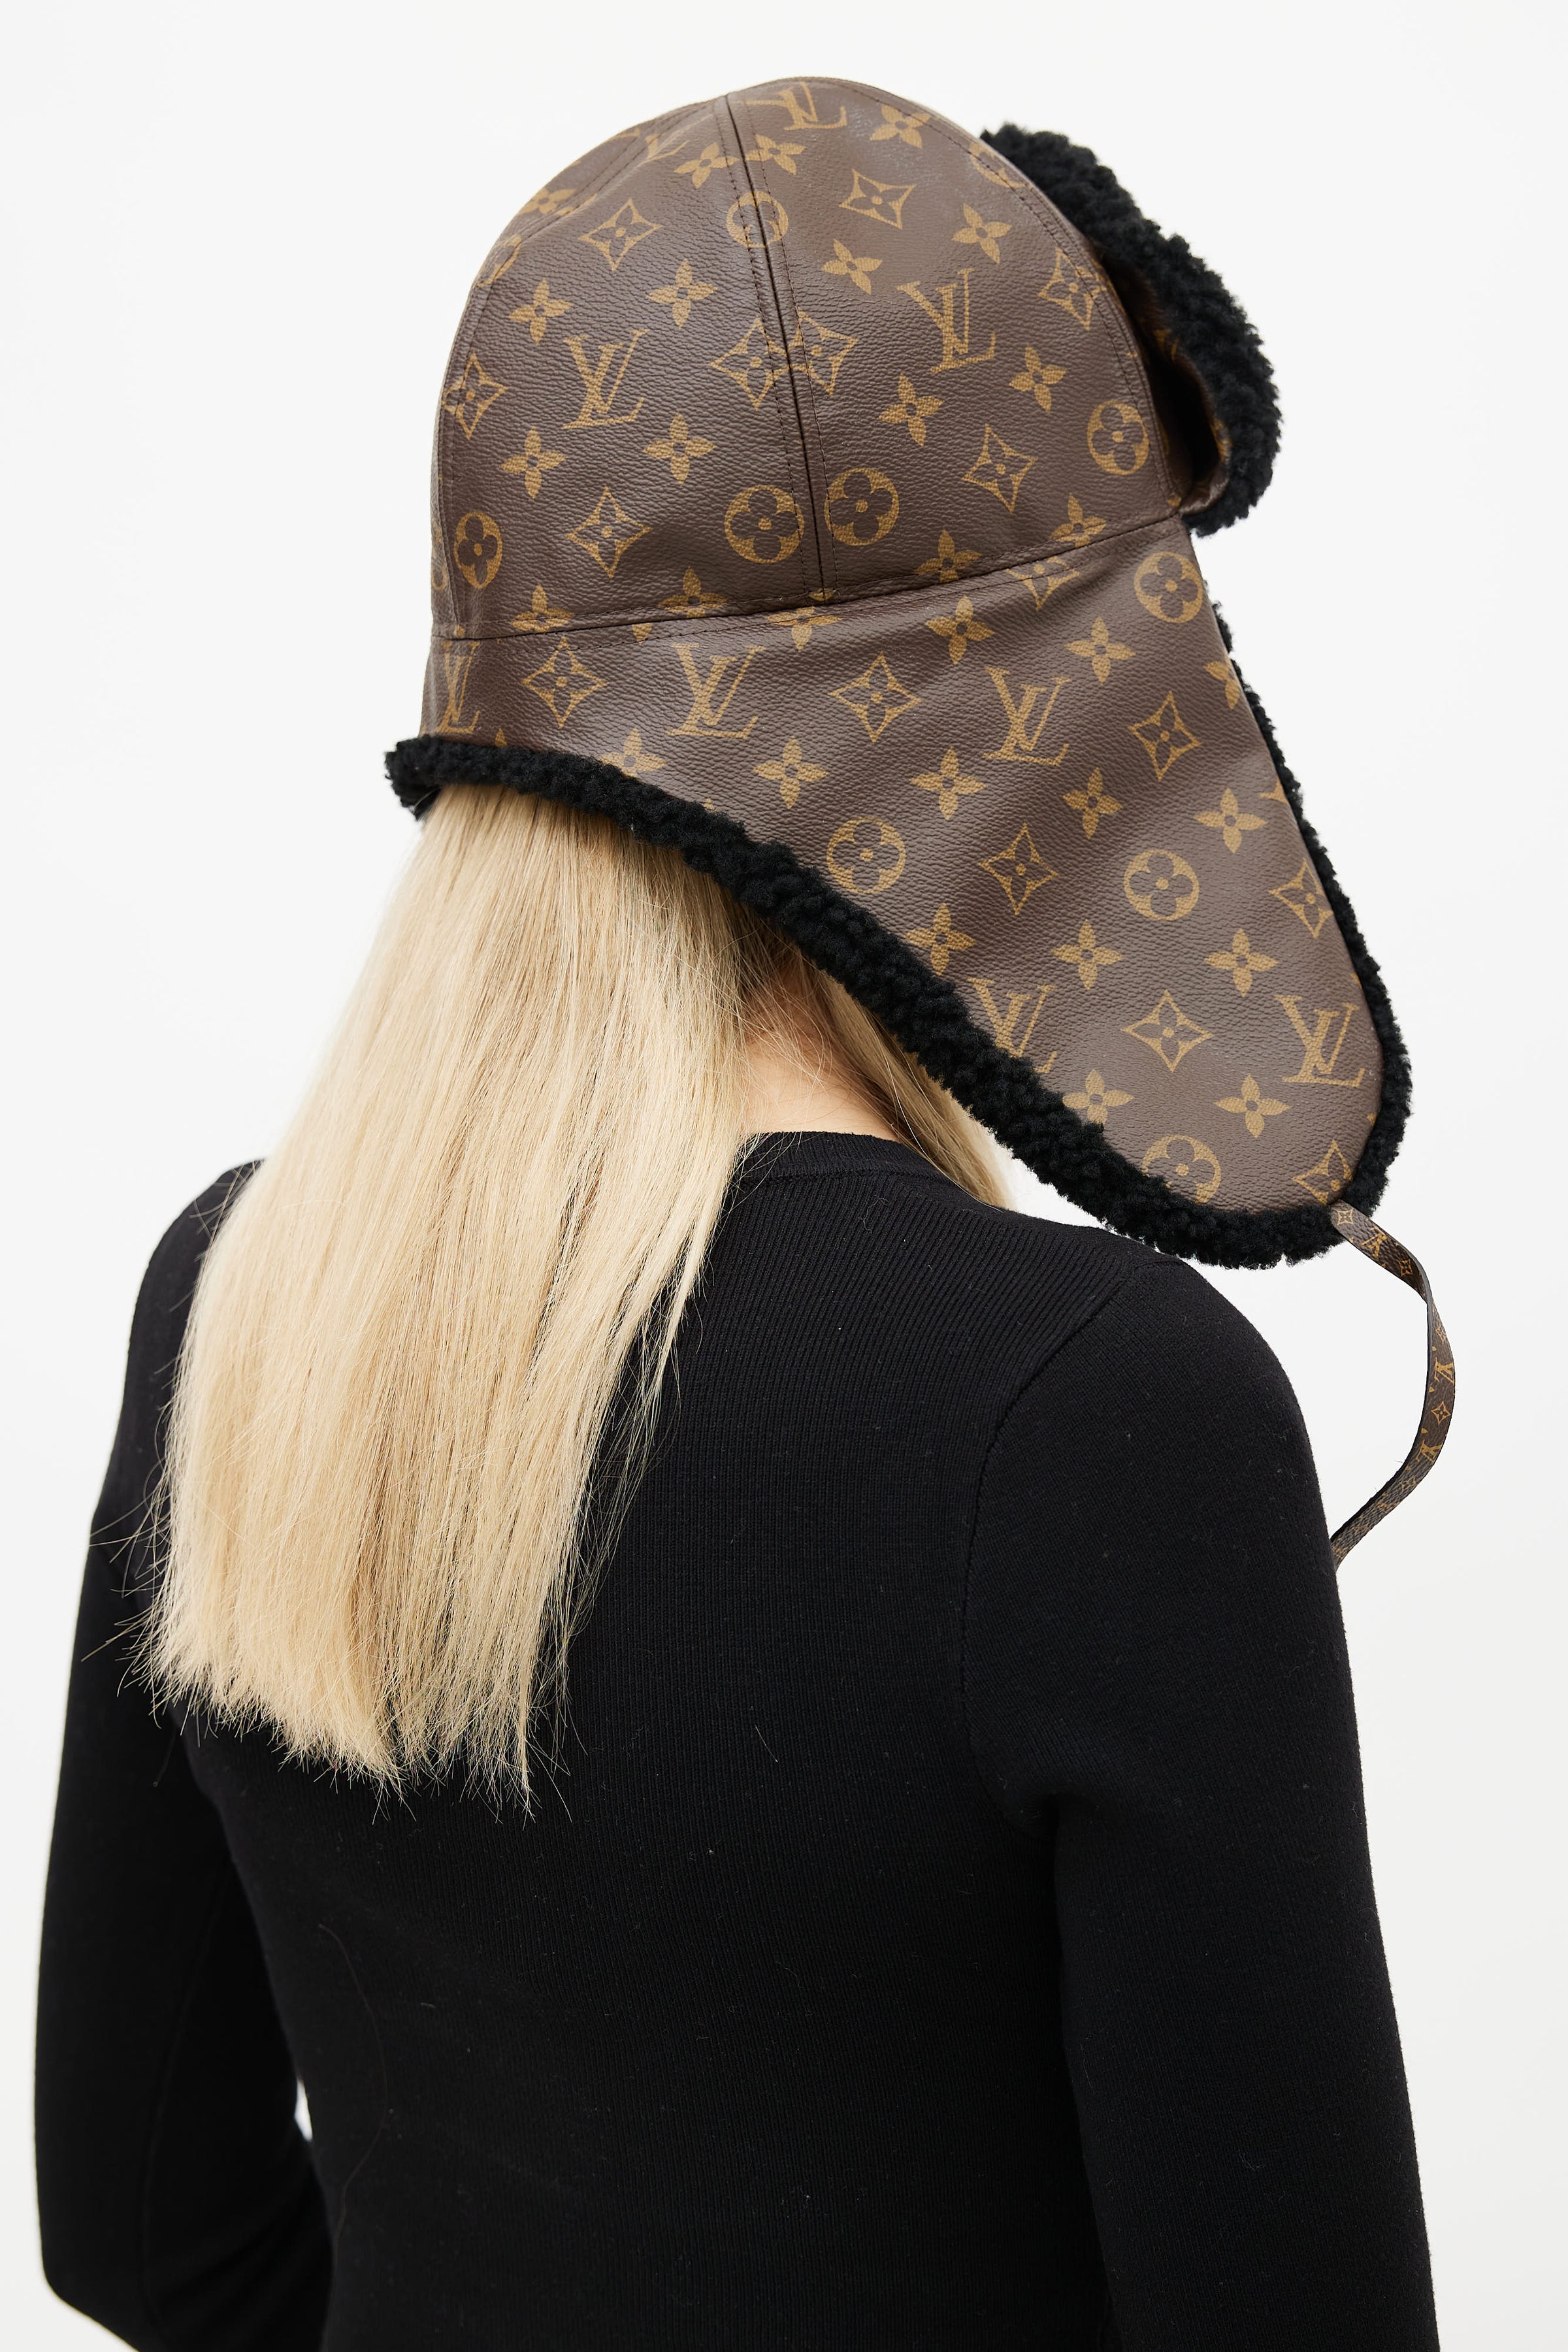 Products by Louis Vuitton: Be My Cap  Louis vuitton accessories, Louis  vuitton, Women accessories hats